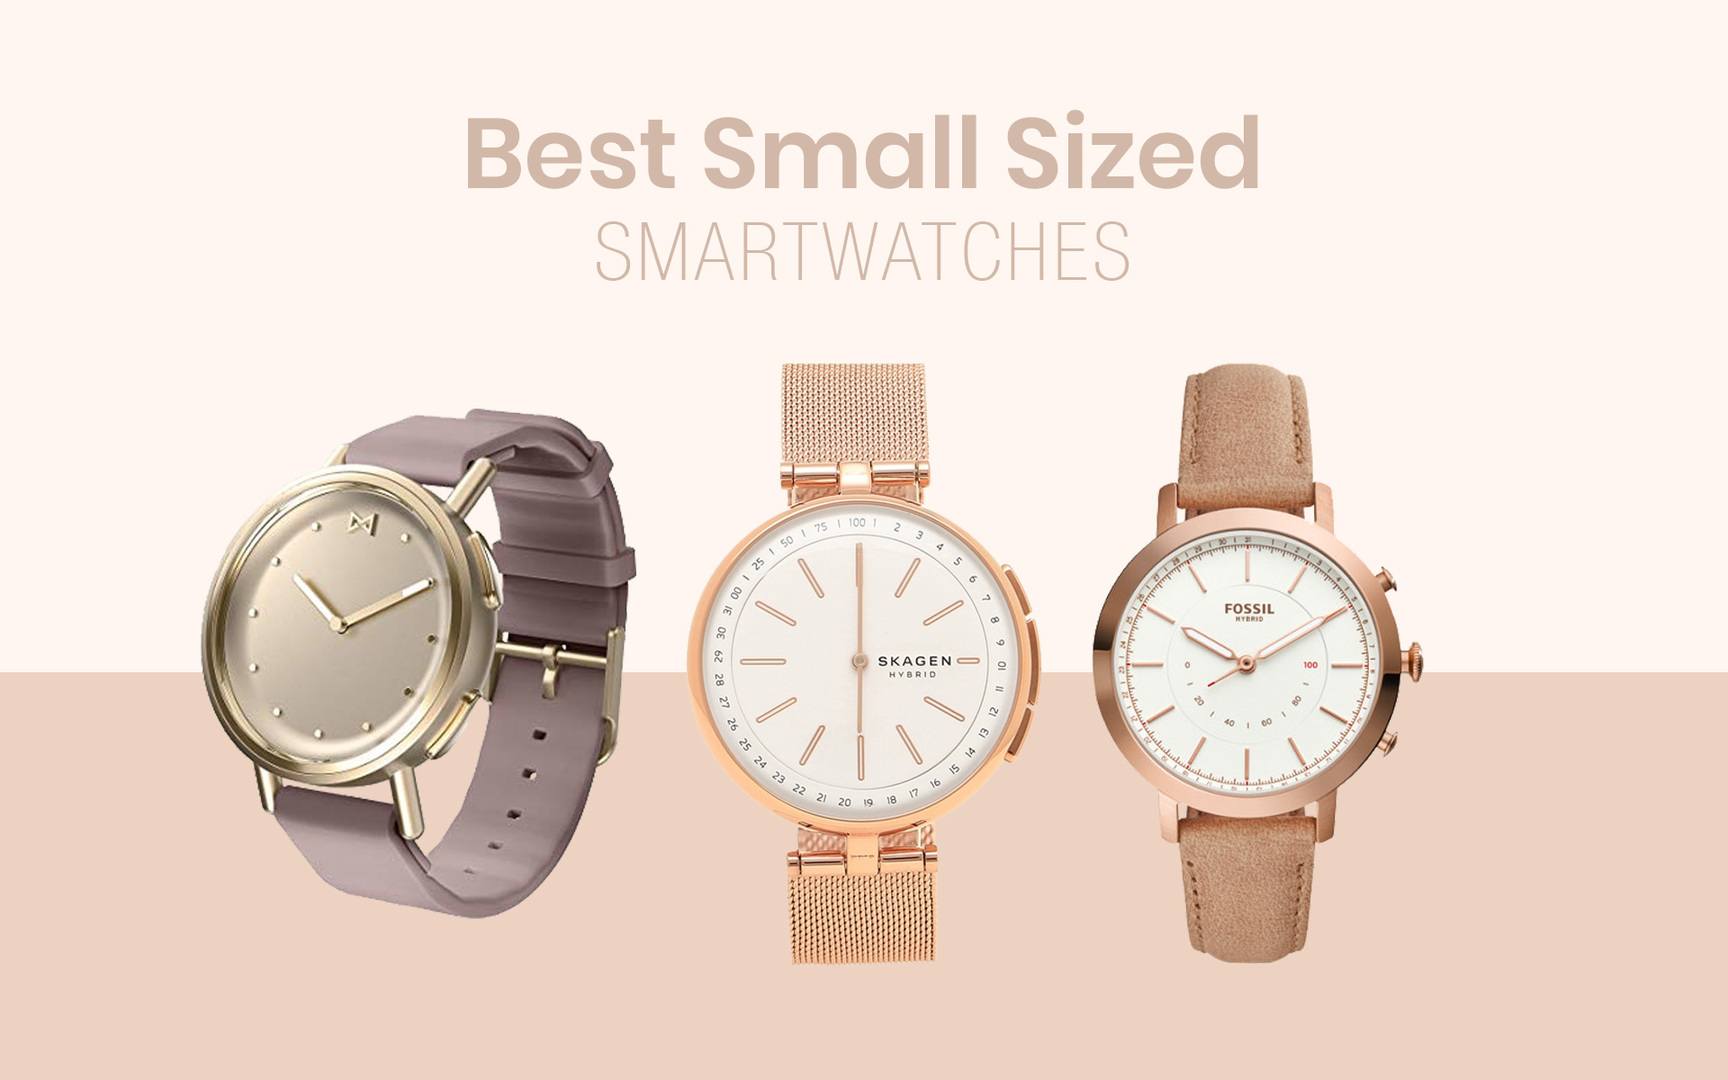 Best Small Sized Smartwatches